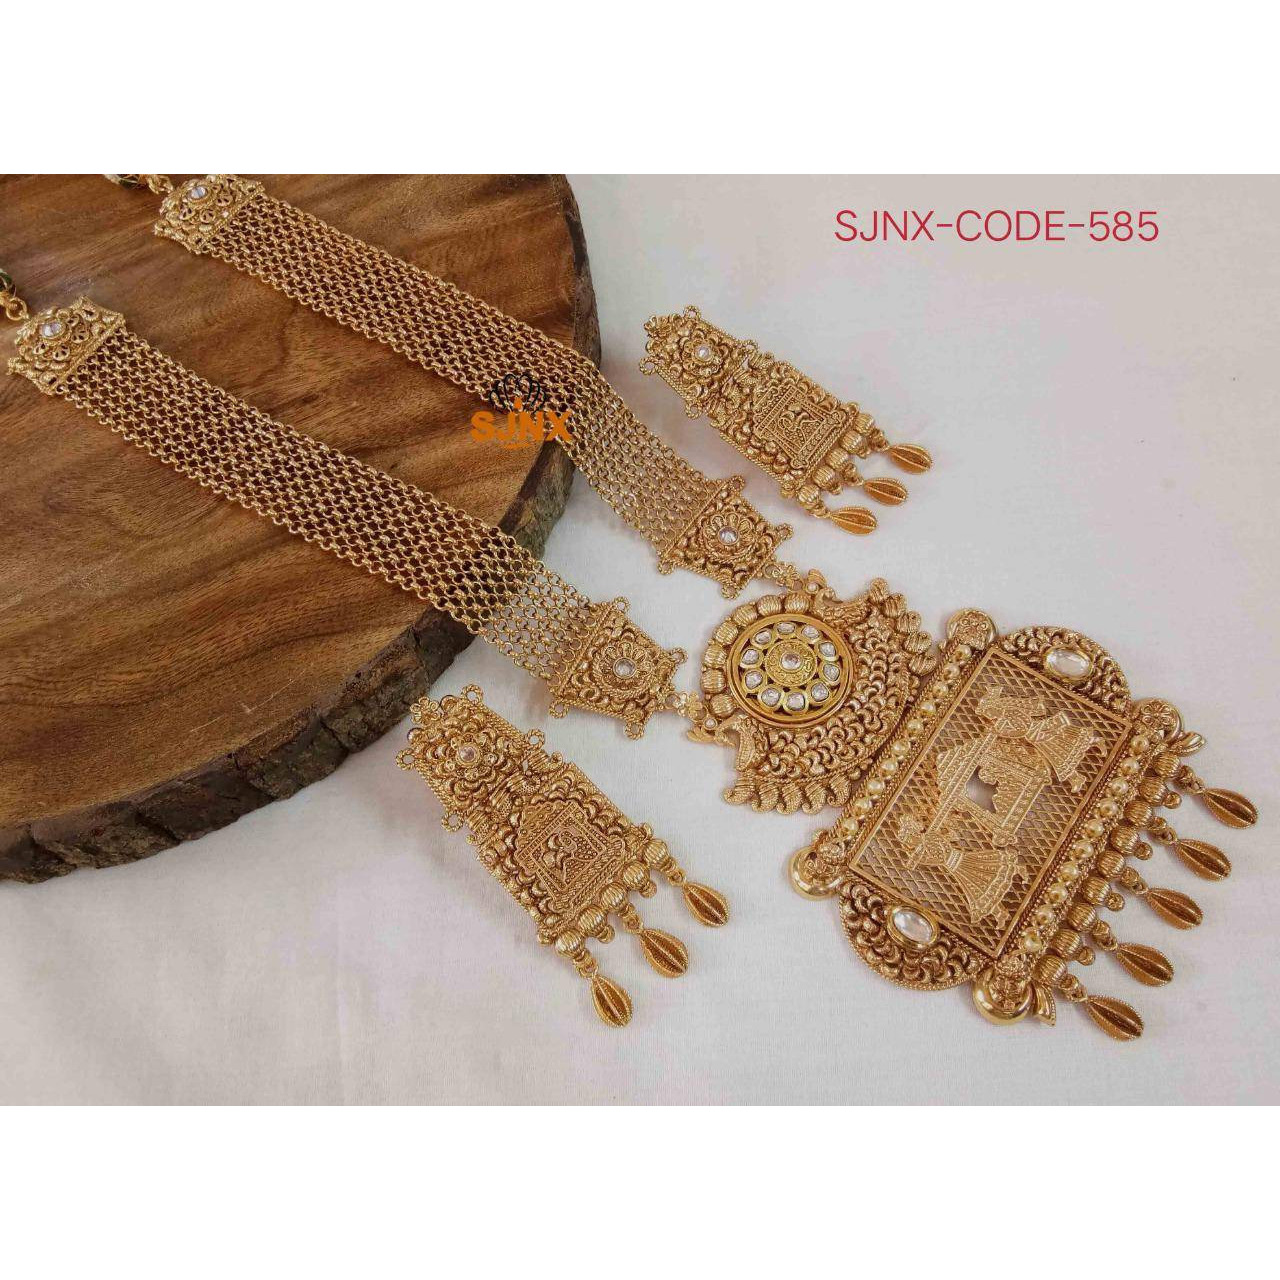 Temple jewelery, South Indian Bridal Jewellery Set, Matte Gold Long Necklace with earrings, Ethnic Traditional Jewellery, Wedding Collection